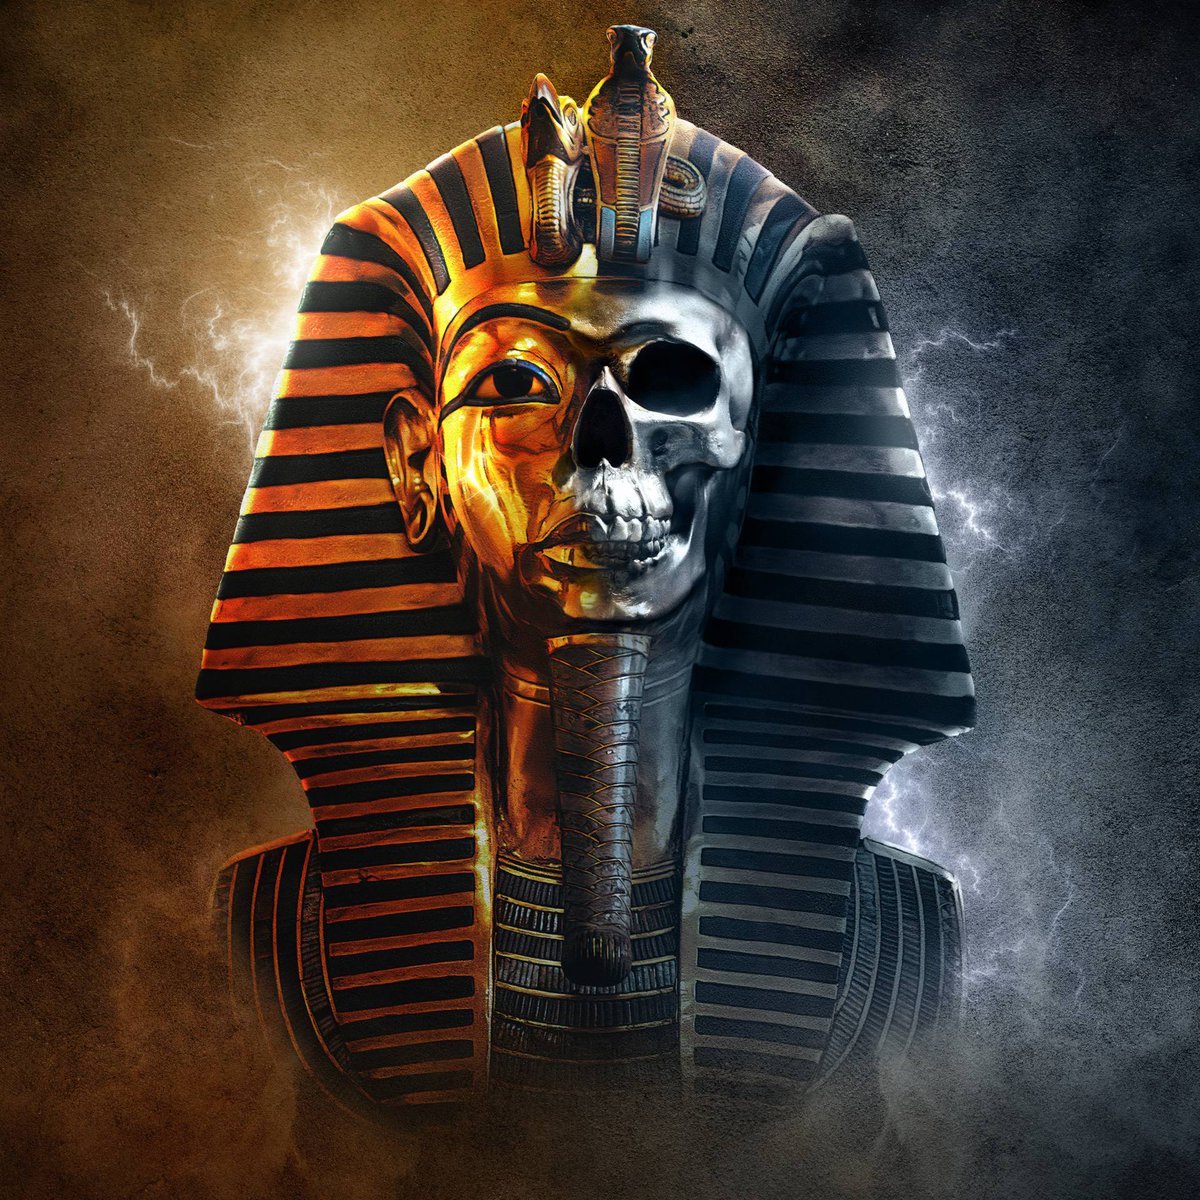 The Curse of the Pharaoh!

When the tomb of Tutankhamun was opened, mysterious deaths occurred. 

A deadly curse was on this tomb!  

Let's hope this won't happen again with the release of the first digital collectible of Tutankhamun in history. #ElmonXTut @elmonx_official